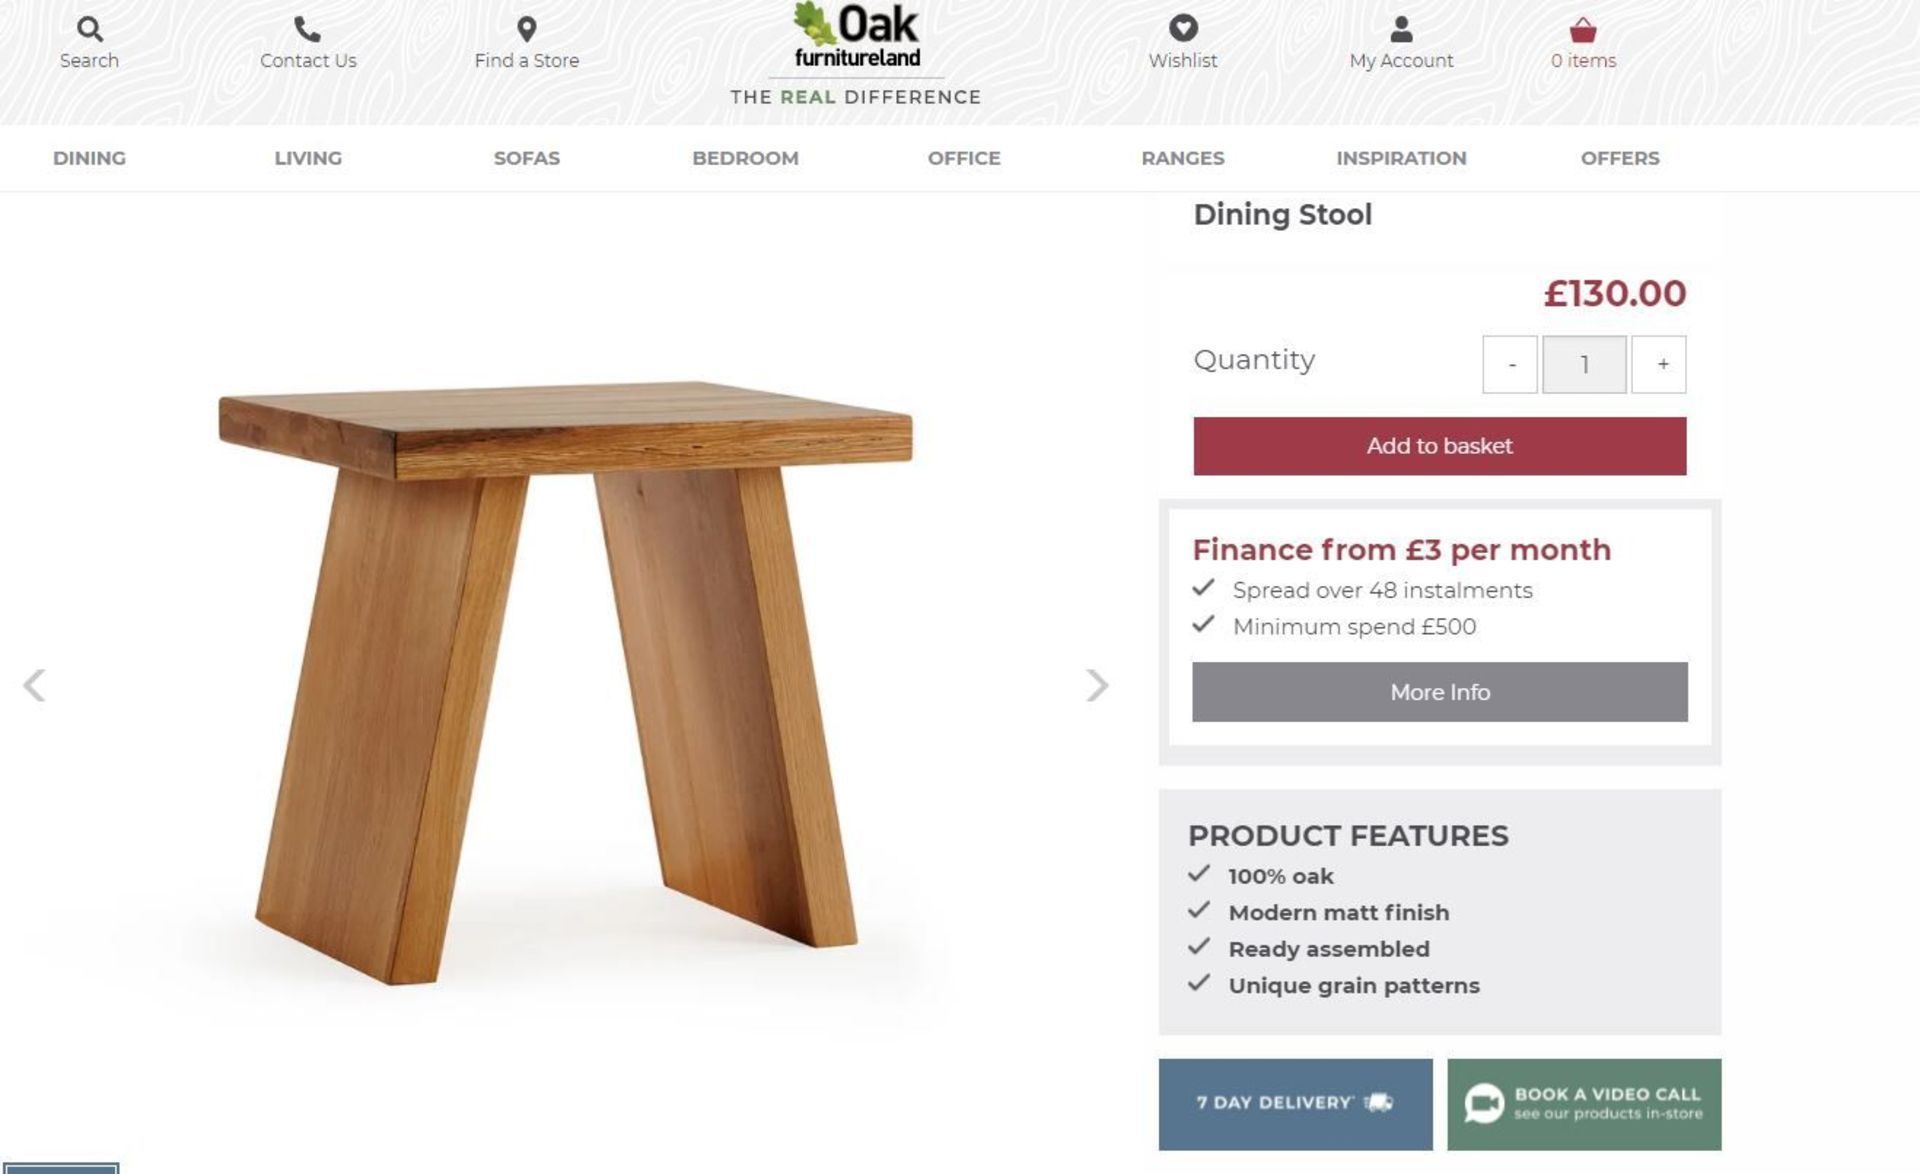 4 X NEW BOXED Natural Solid Oak Stool. RRP £130 EACH, TOTAL RRP £520. For a more open seating